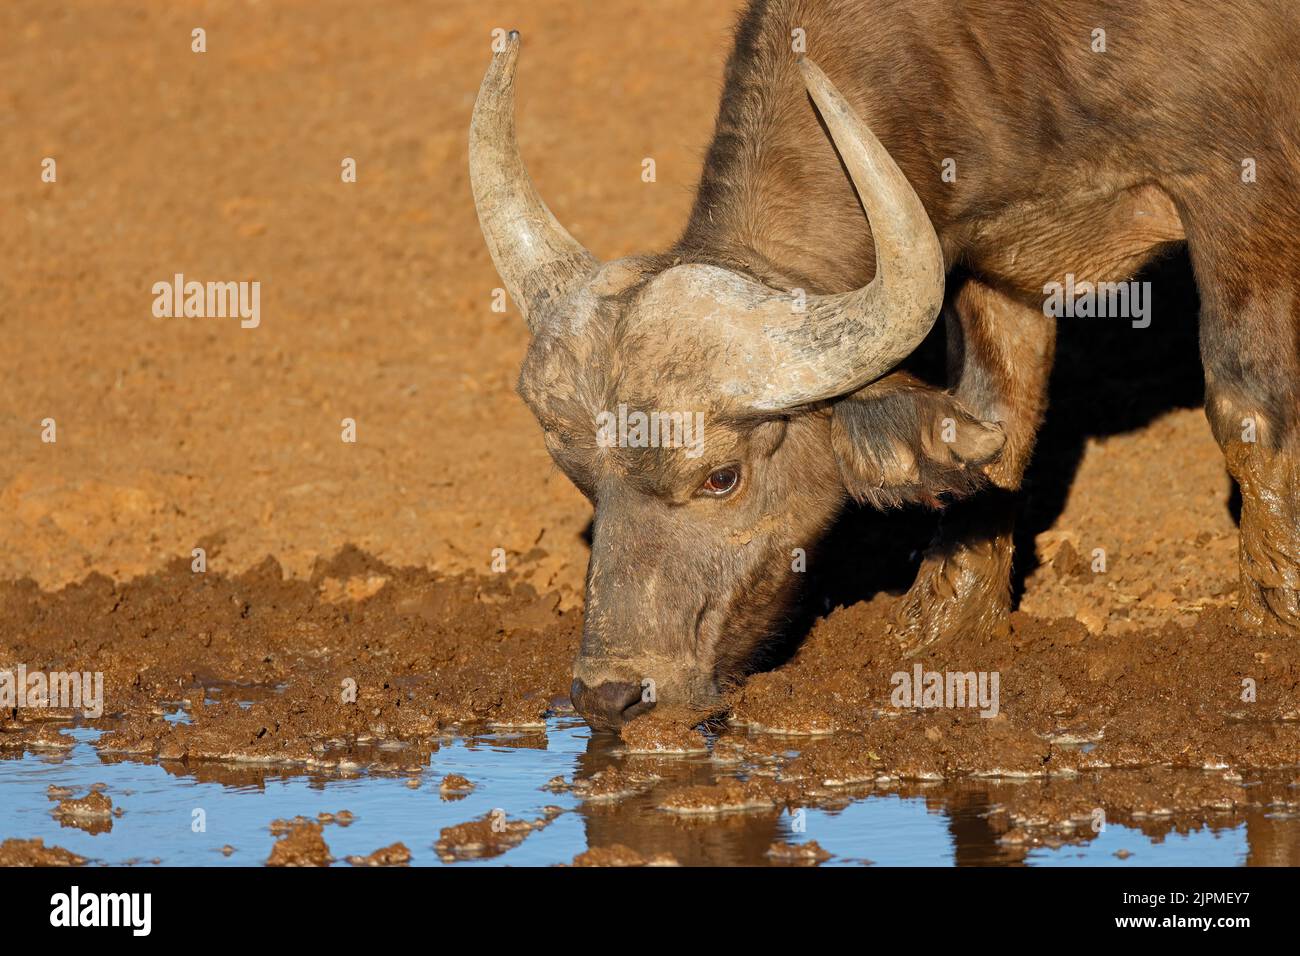 Portrait of an African of Cape buffaloes (Syncerus caffer) drinking water, Mokala National Park, South Africa Stock Photo